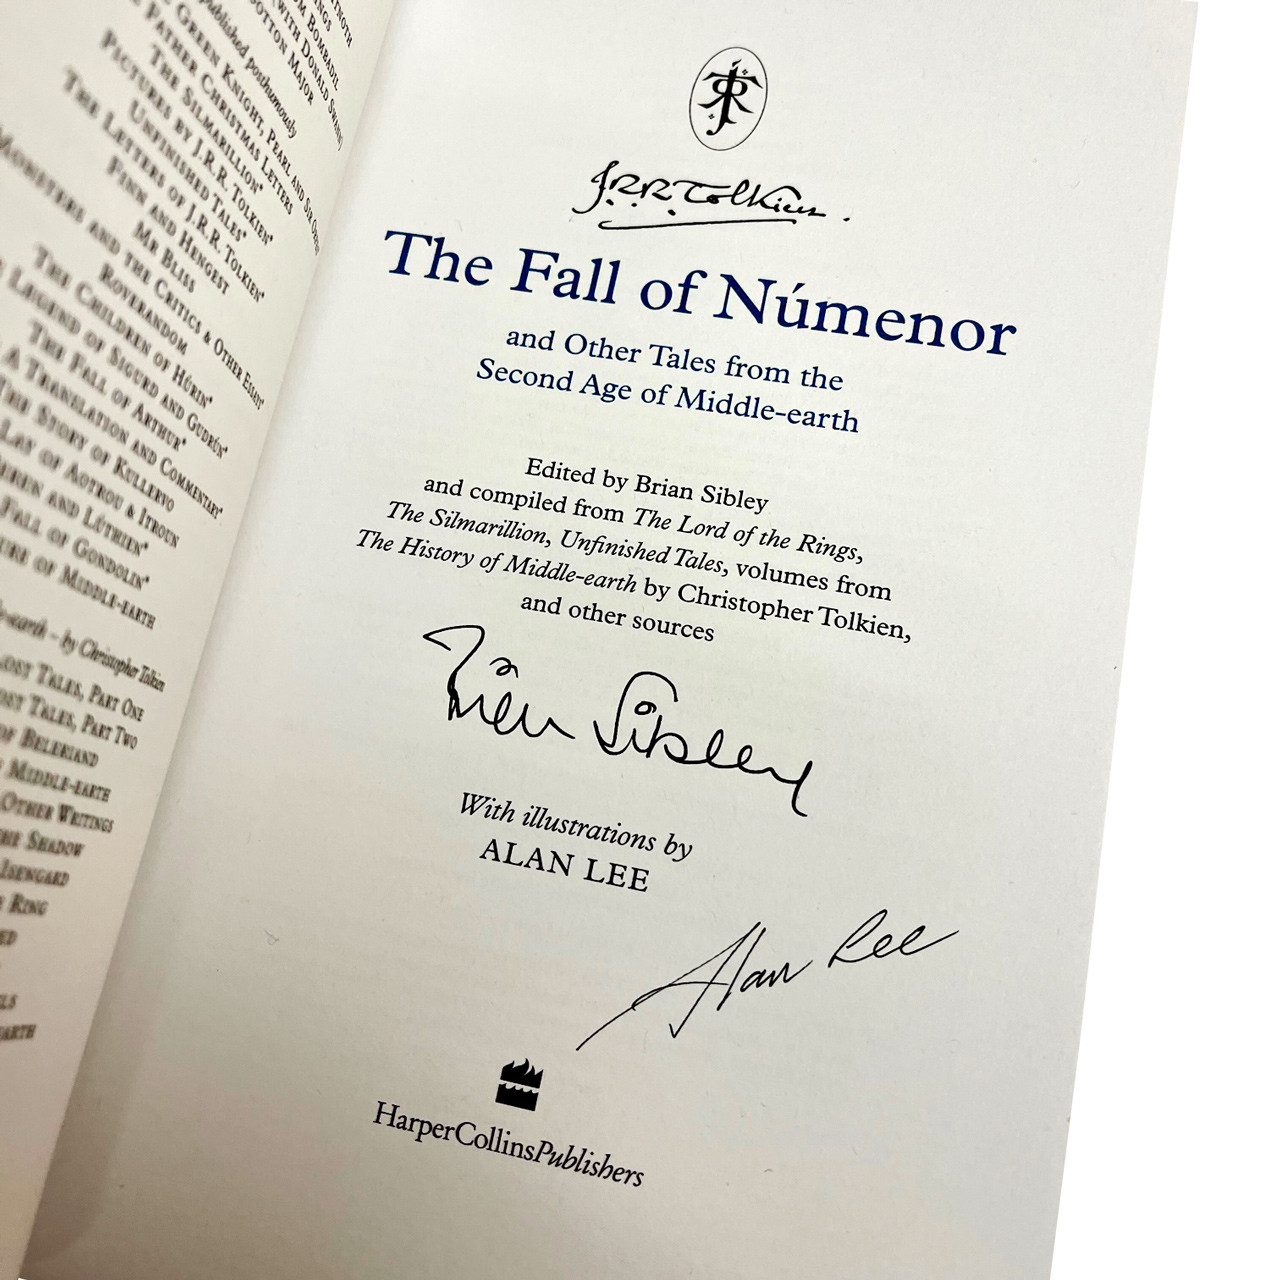 J.R.R. Tolkien "The Fall of Numenor" Double Signed Deluxe Slipcased Limited Edition [Sealed]